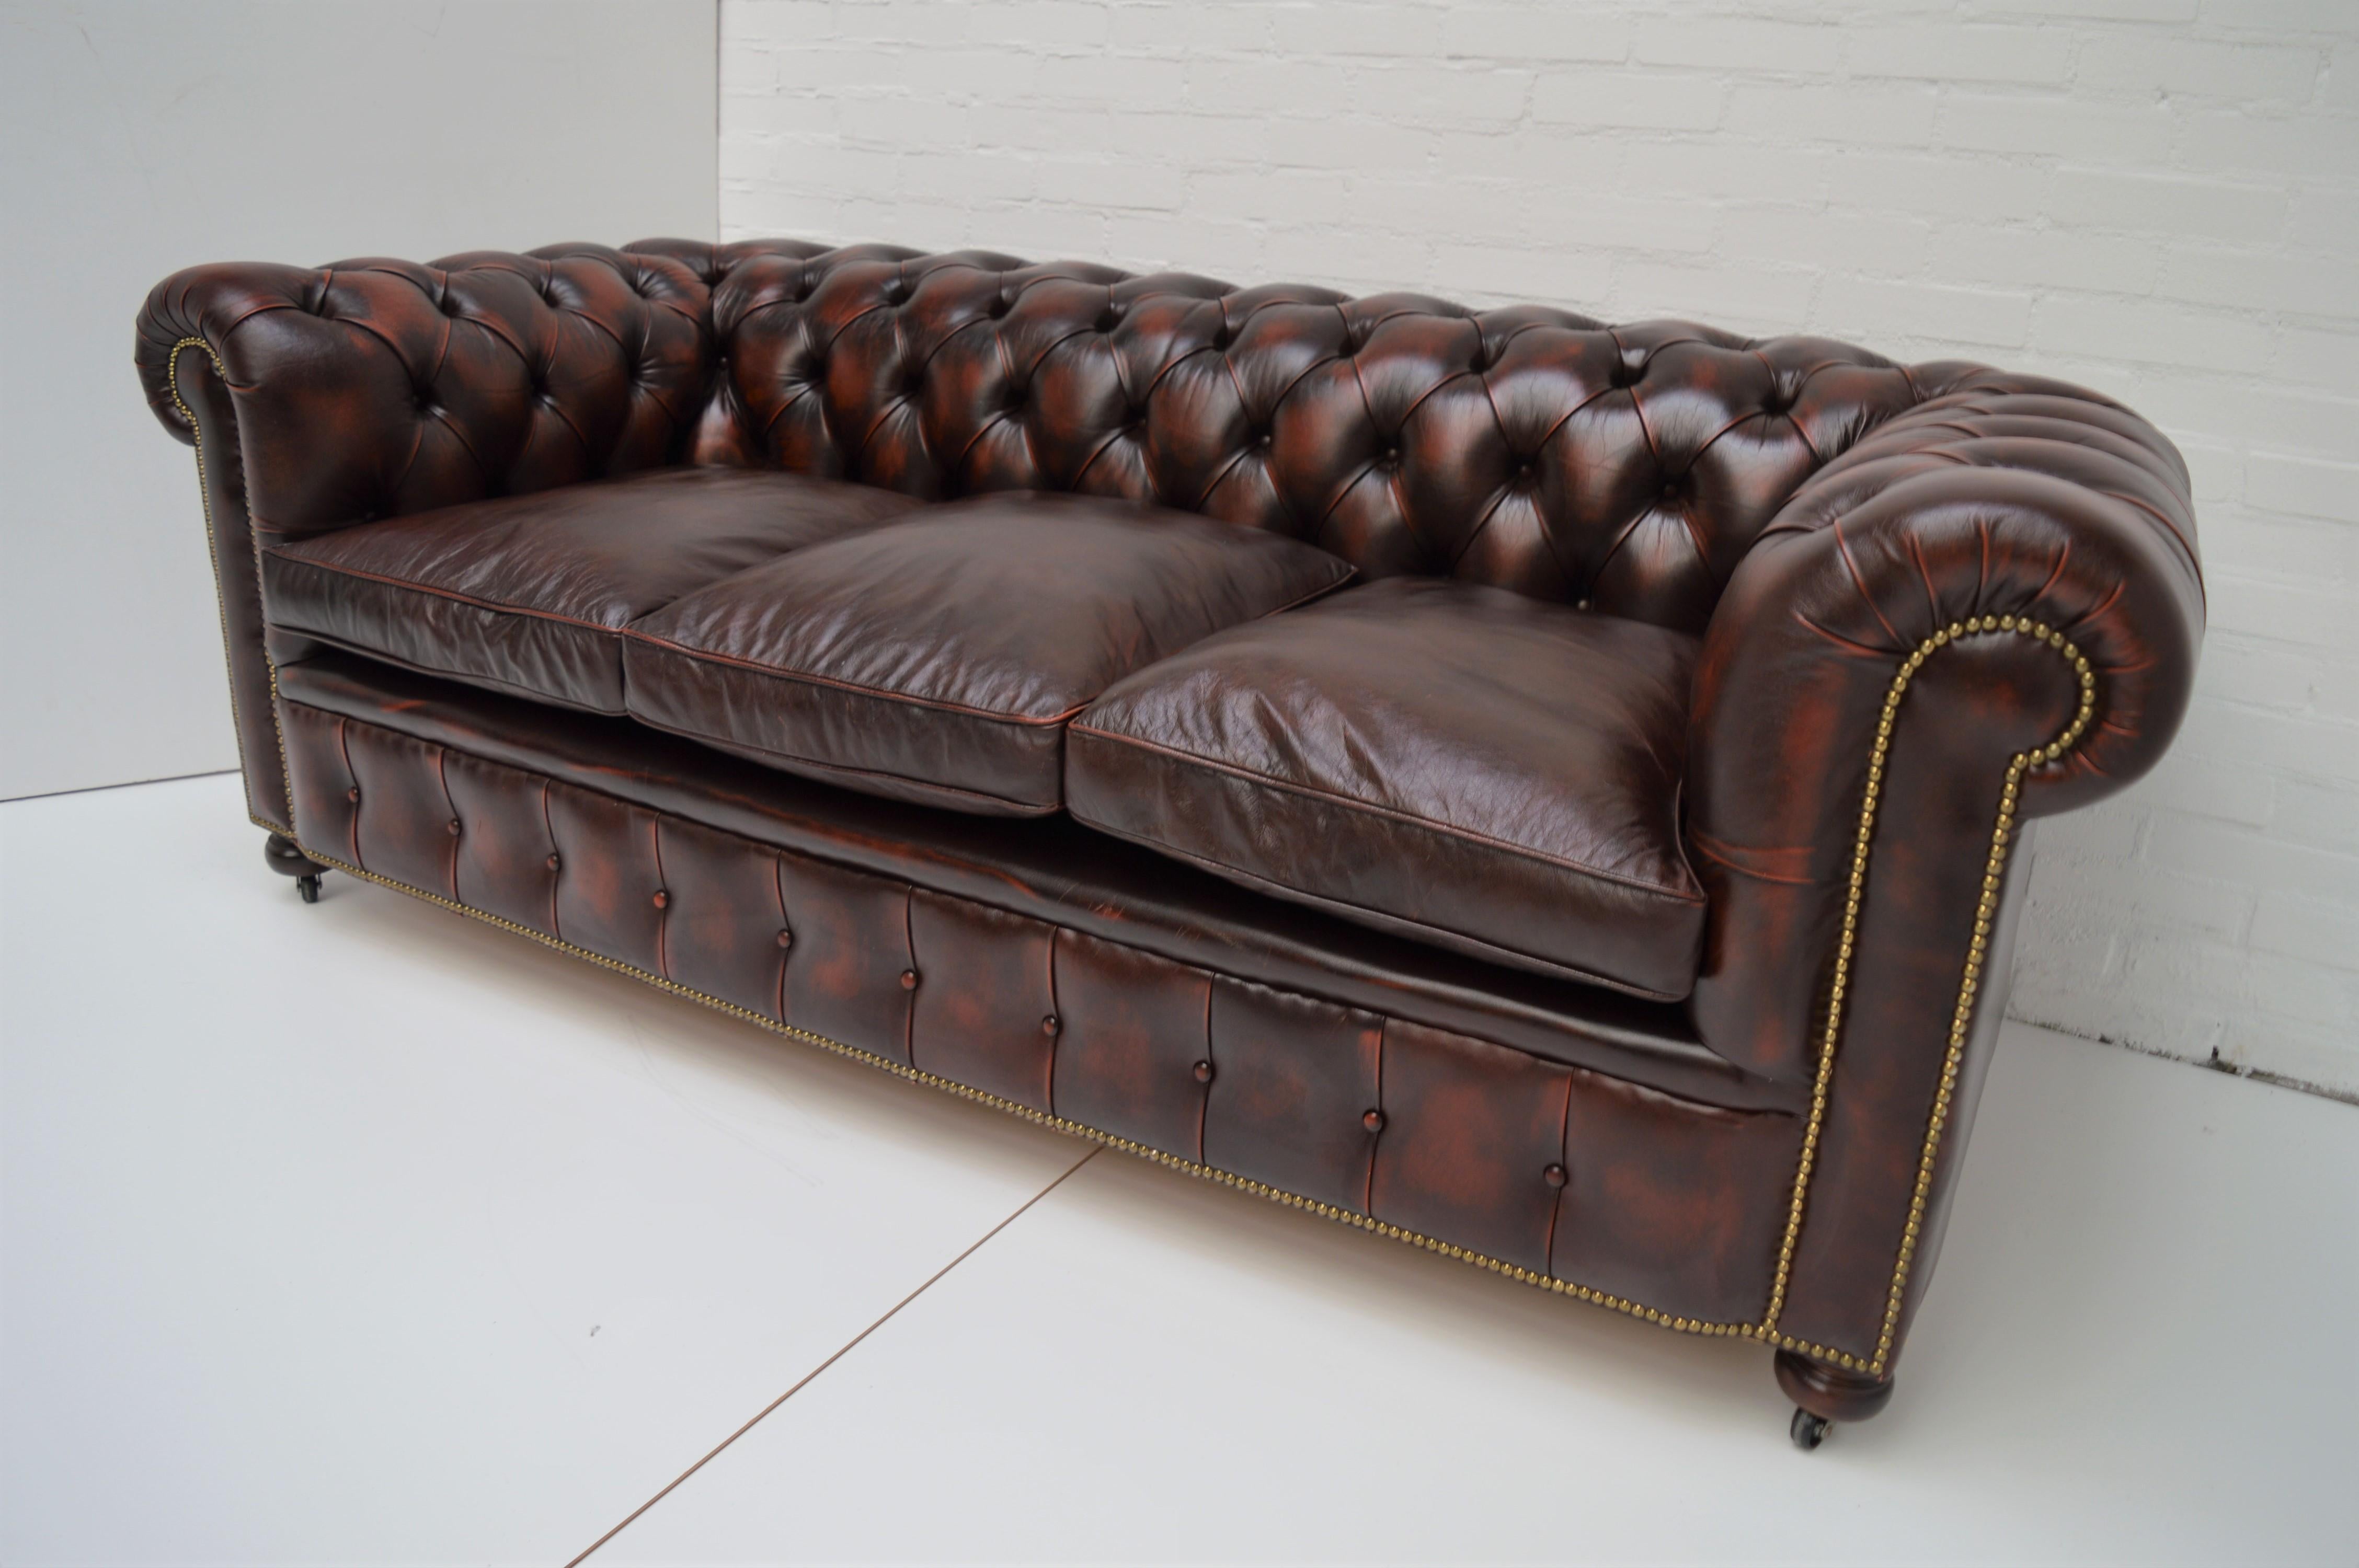 Antique Tan Chesterfield Sofa with Brass Castors / Wheels In Good Condition For Sale In Eindhoven, NL